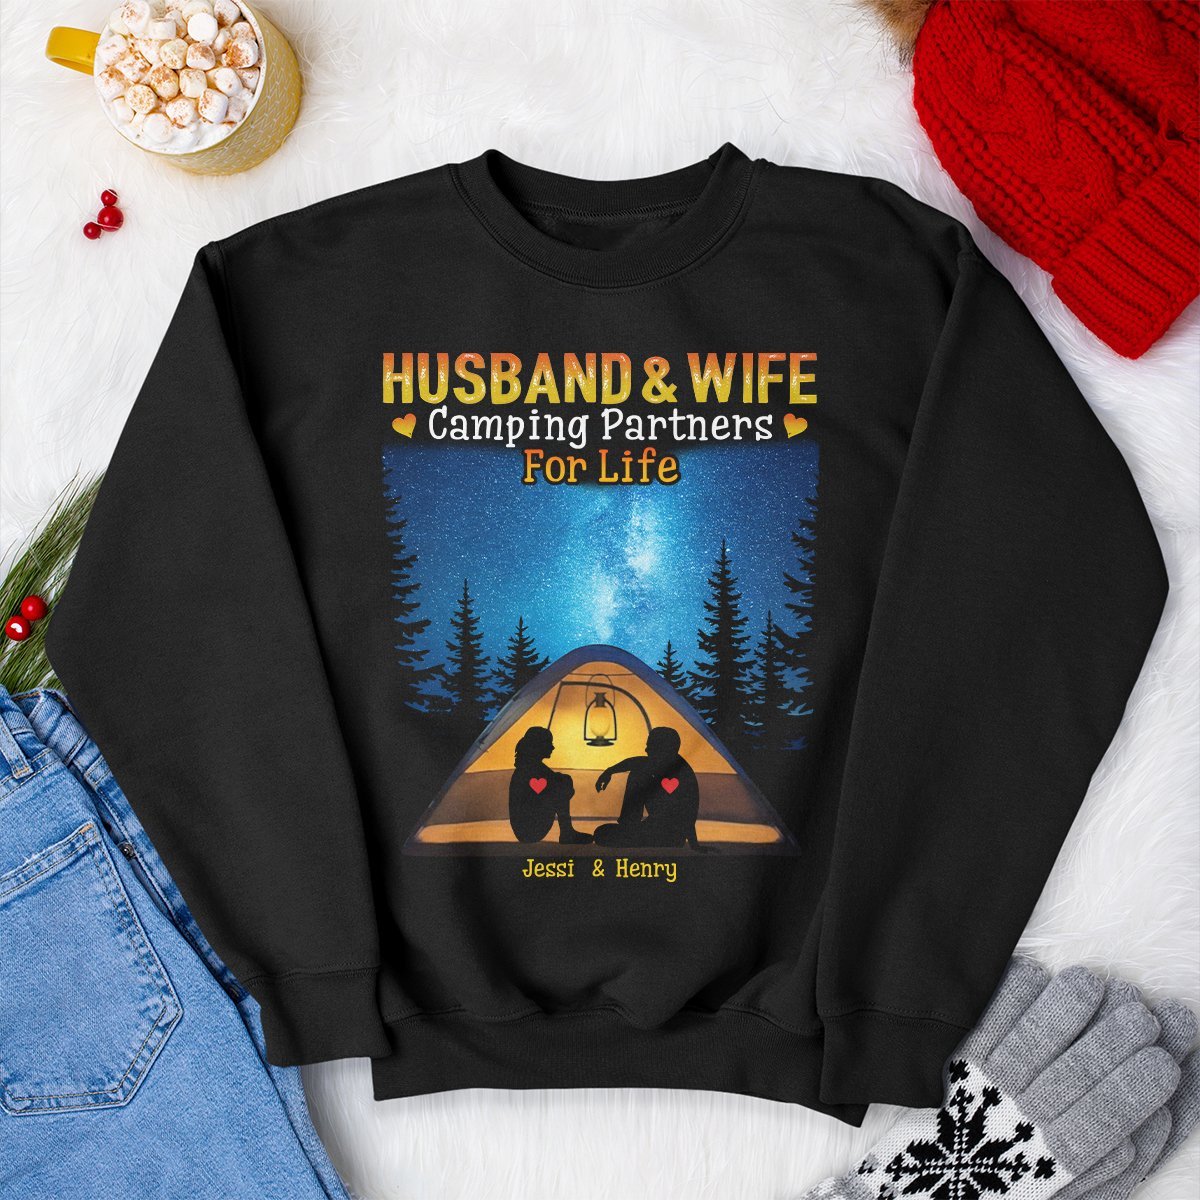 Husband & Wife Camping Partners For Life Personalized Shirt